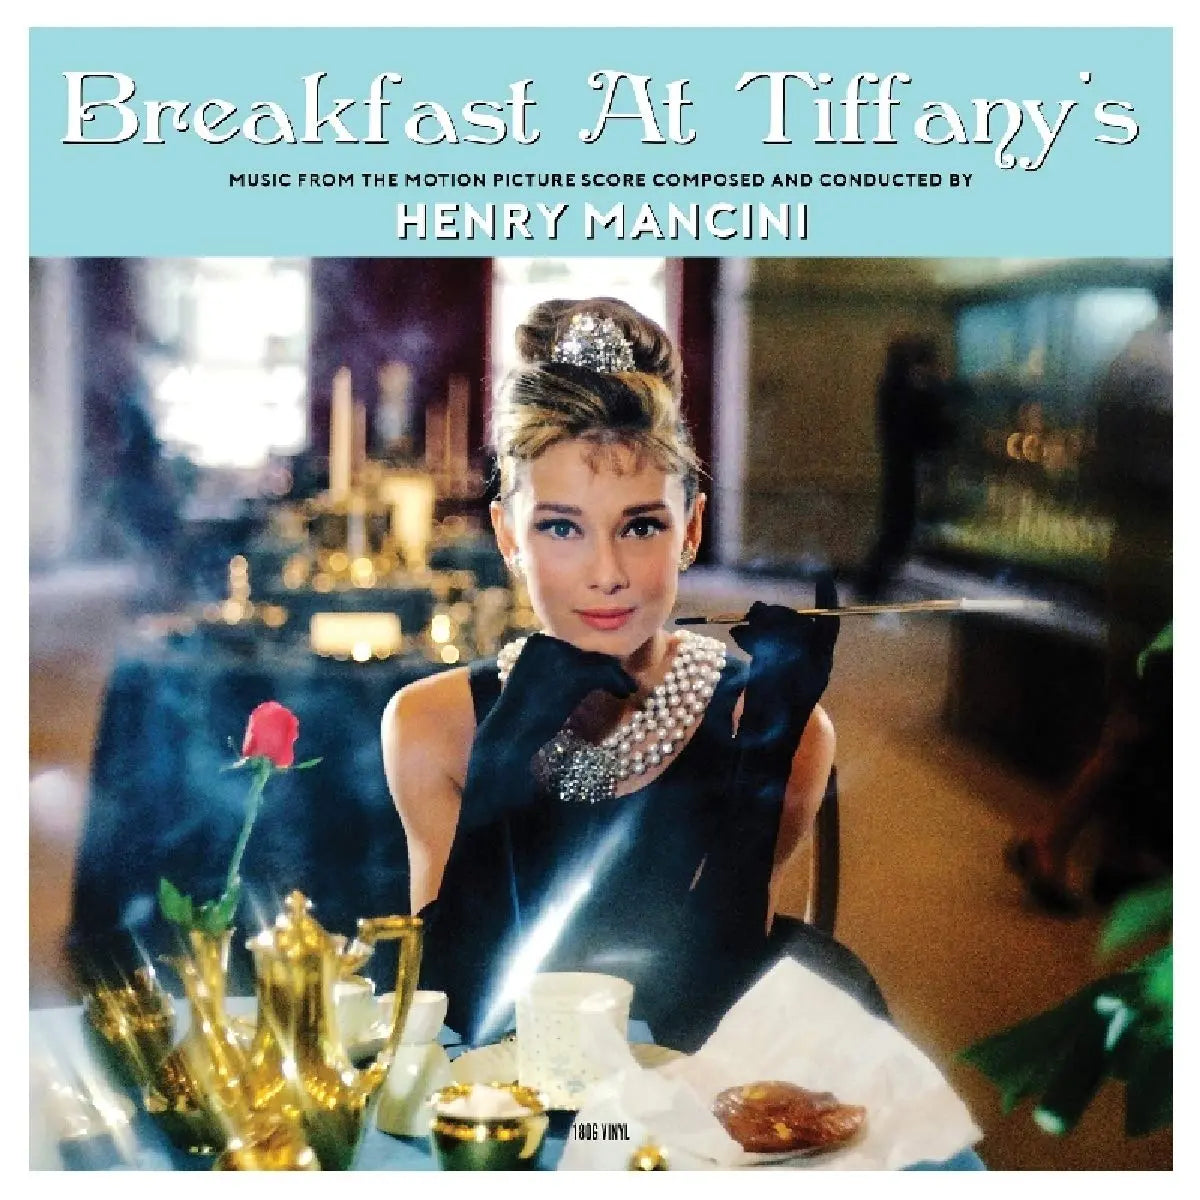 Henry Mancini - Breakfast at Tiffany's (Music From the Motion Picture Score) [180 Gram-Vinyl, Colored Import]